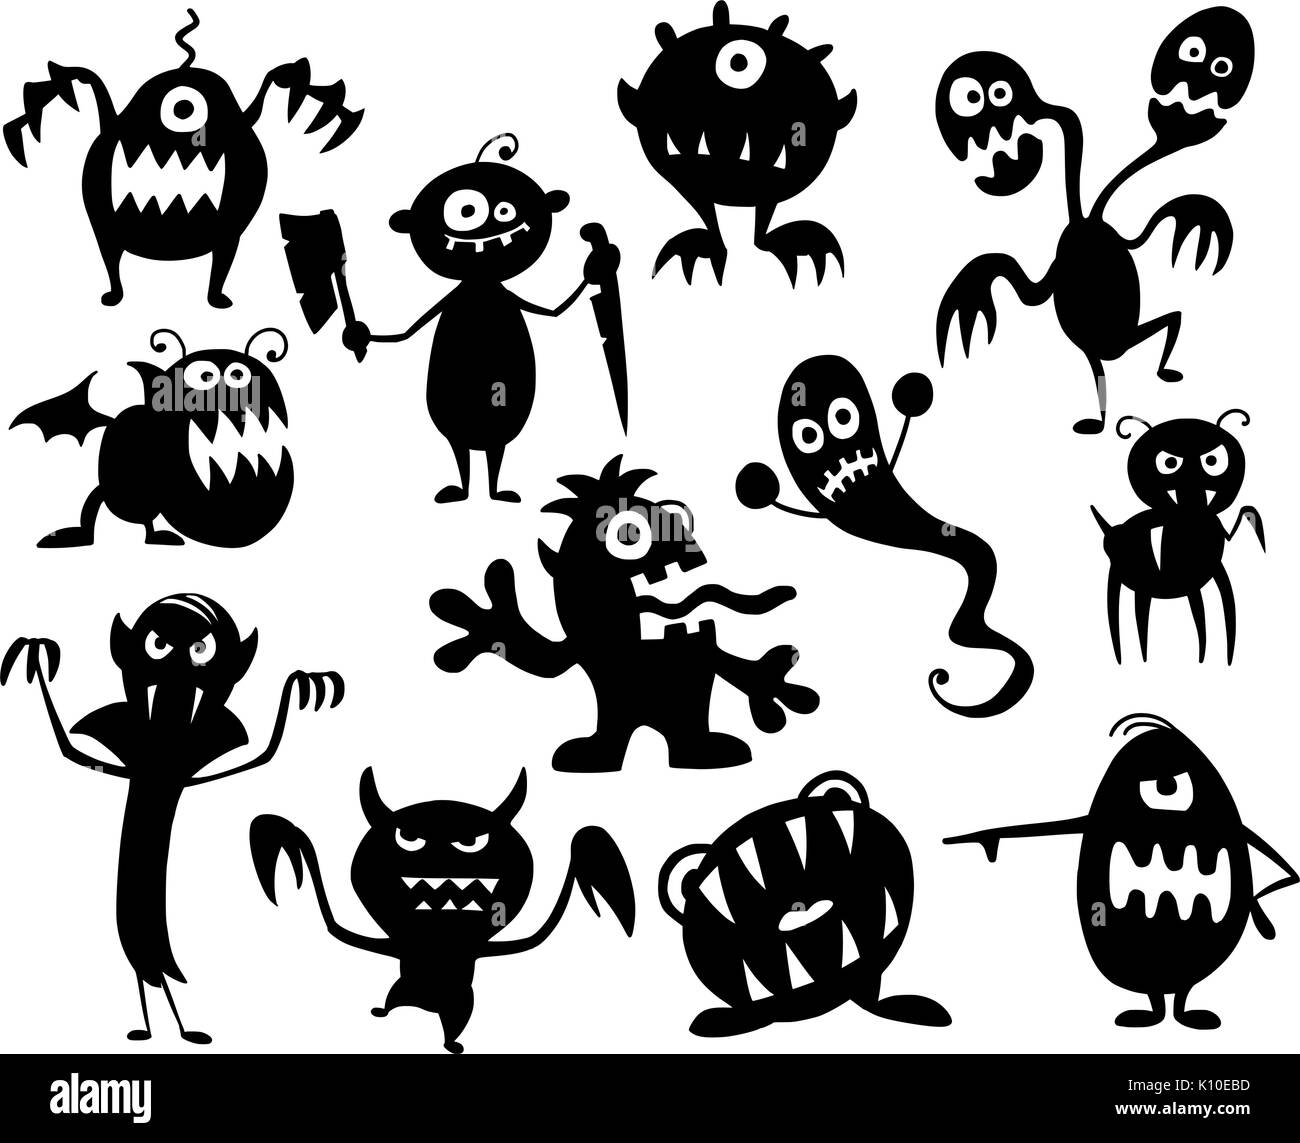 Hand drawing illustration set of cute halloween monster silhouettes. Stock Vector